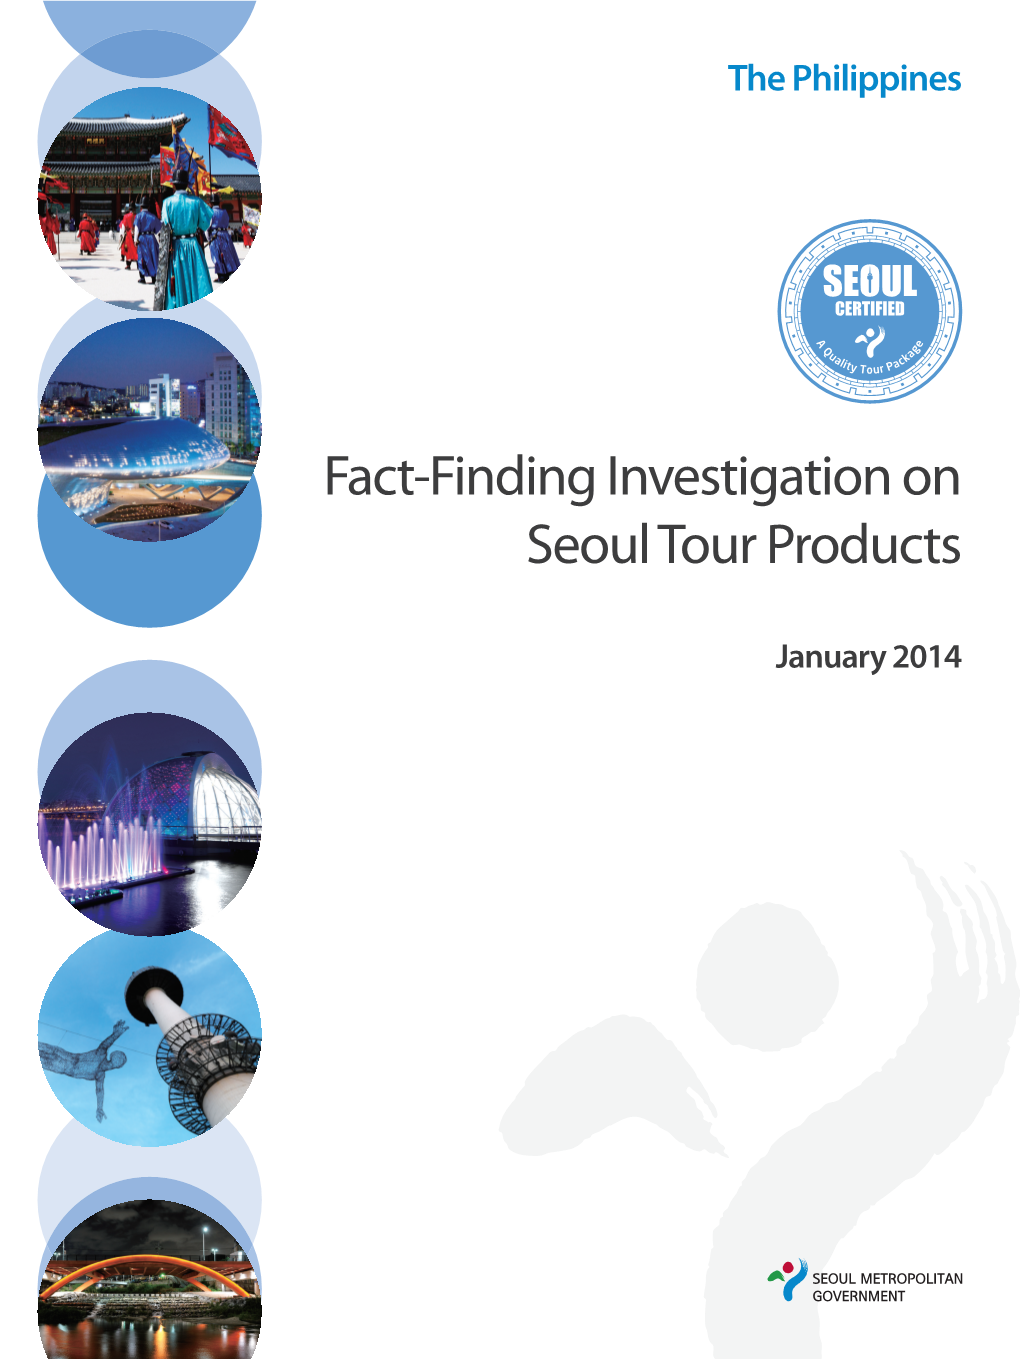 Fact-Finding Investigation on Seoul Tour Products